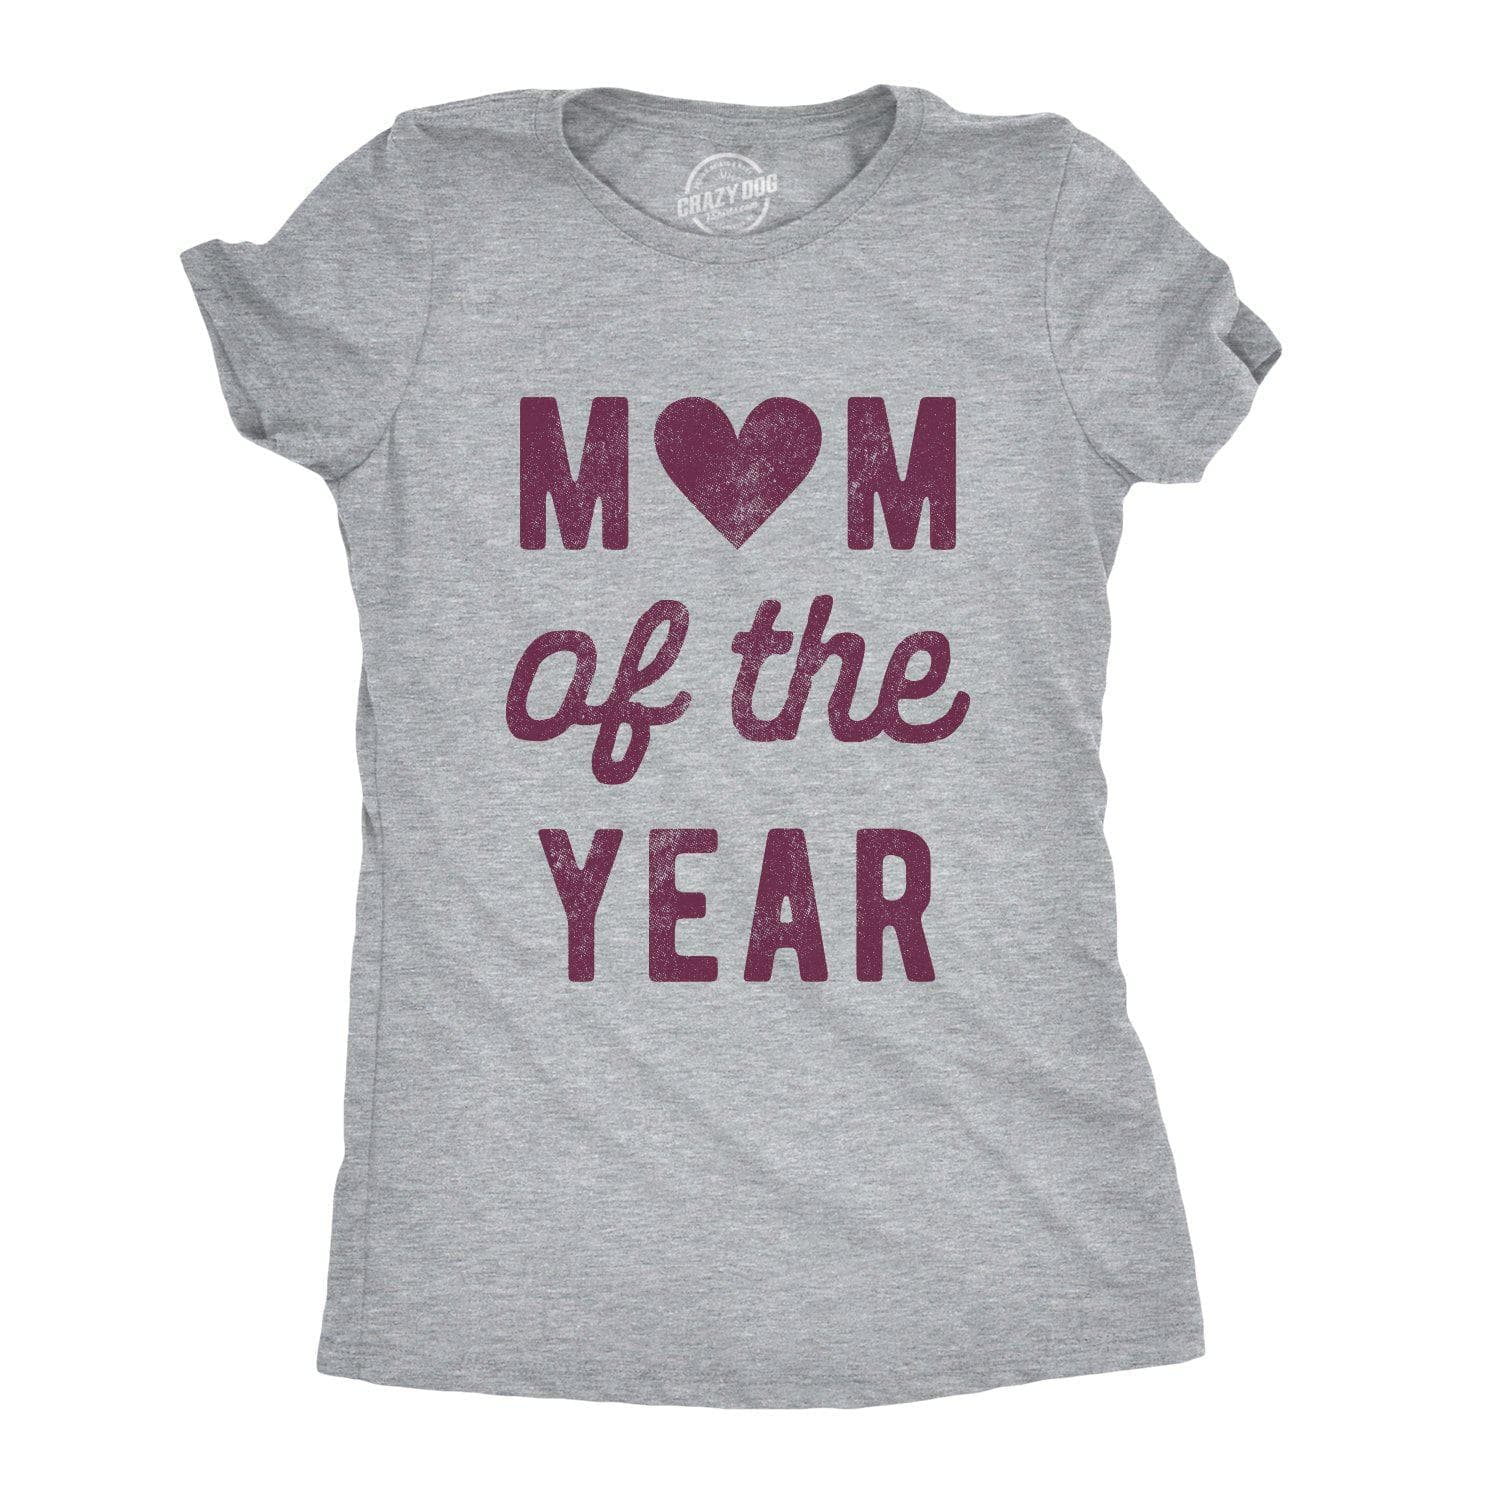 Mom Of The Year Women's Tshirt - Crazy Dog T-Shirts